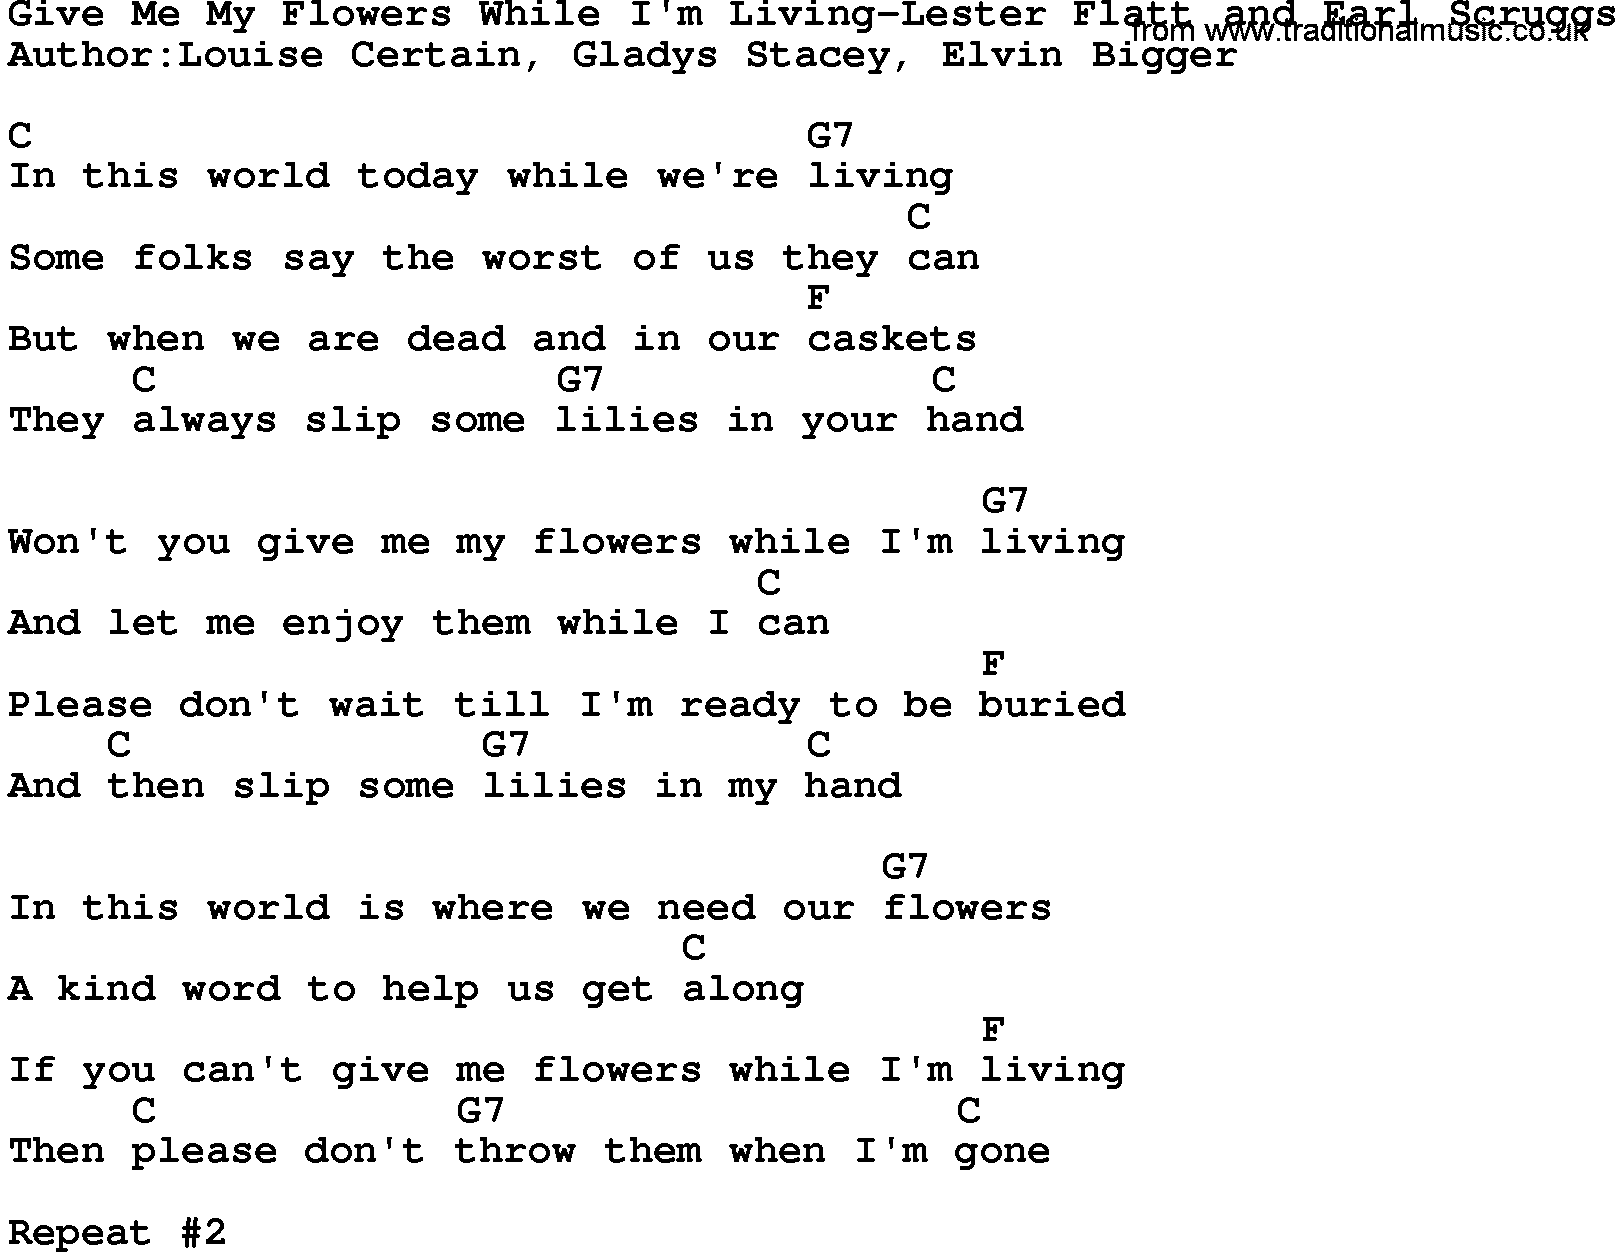 Country music song: Give Me My Flowers While I'm Living-Lester Flatt And Earl Scruggs lyrics and chords